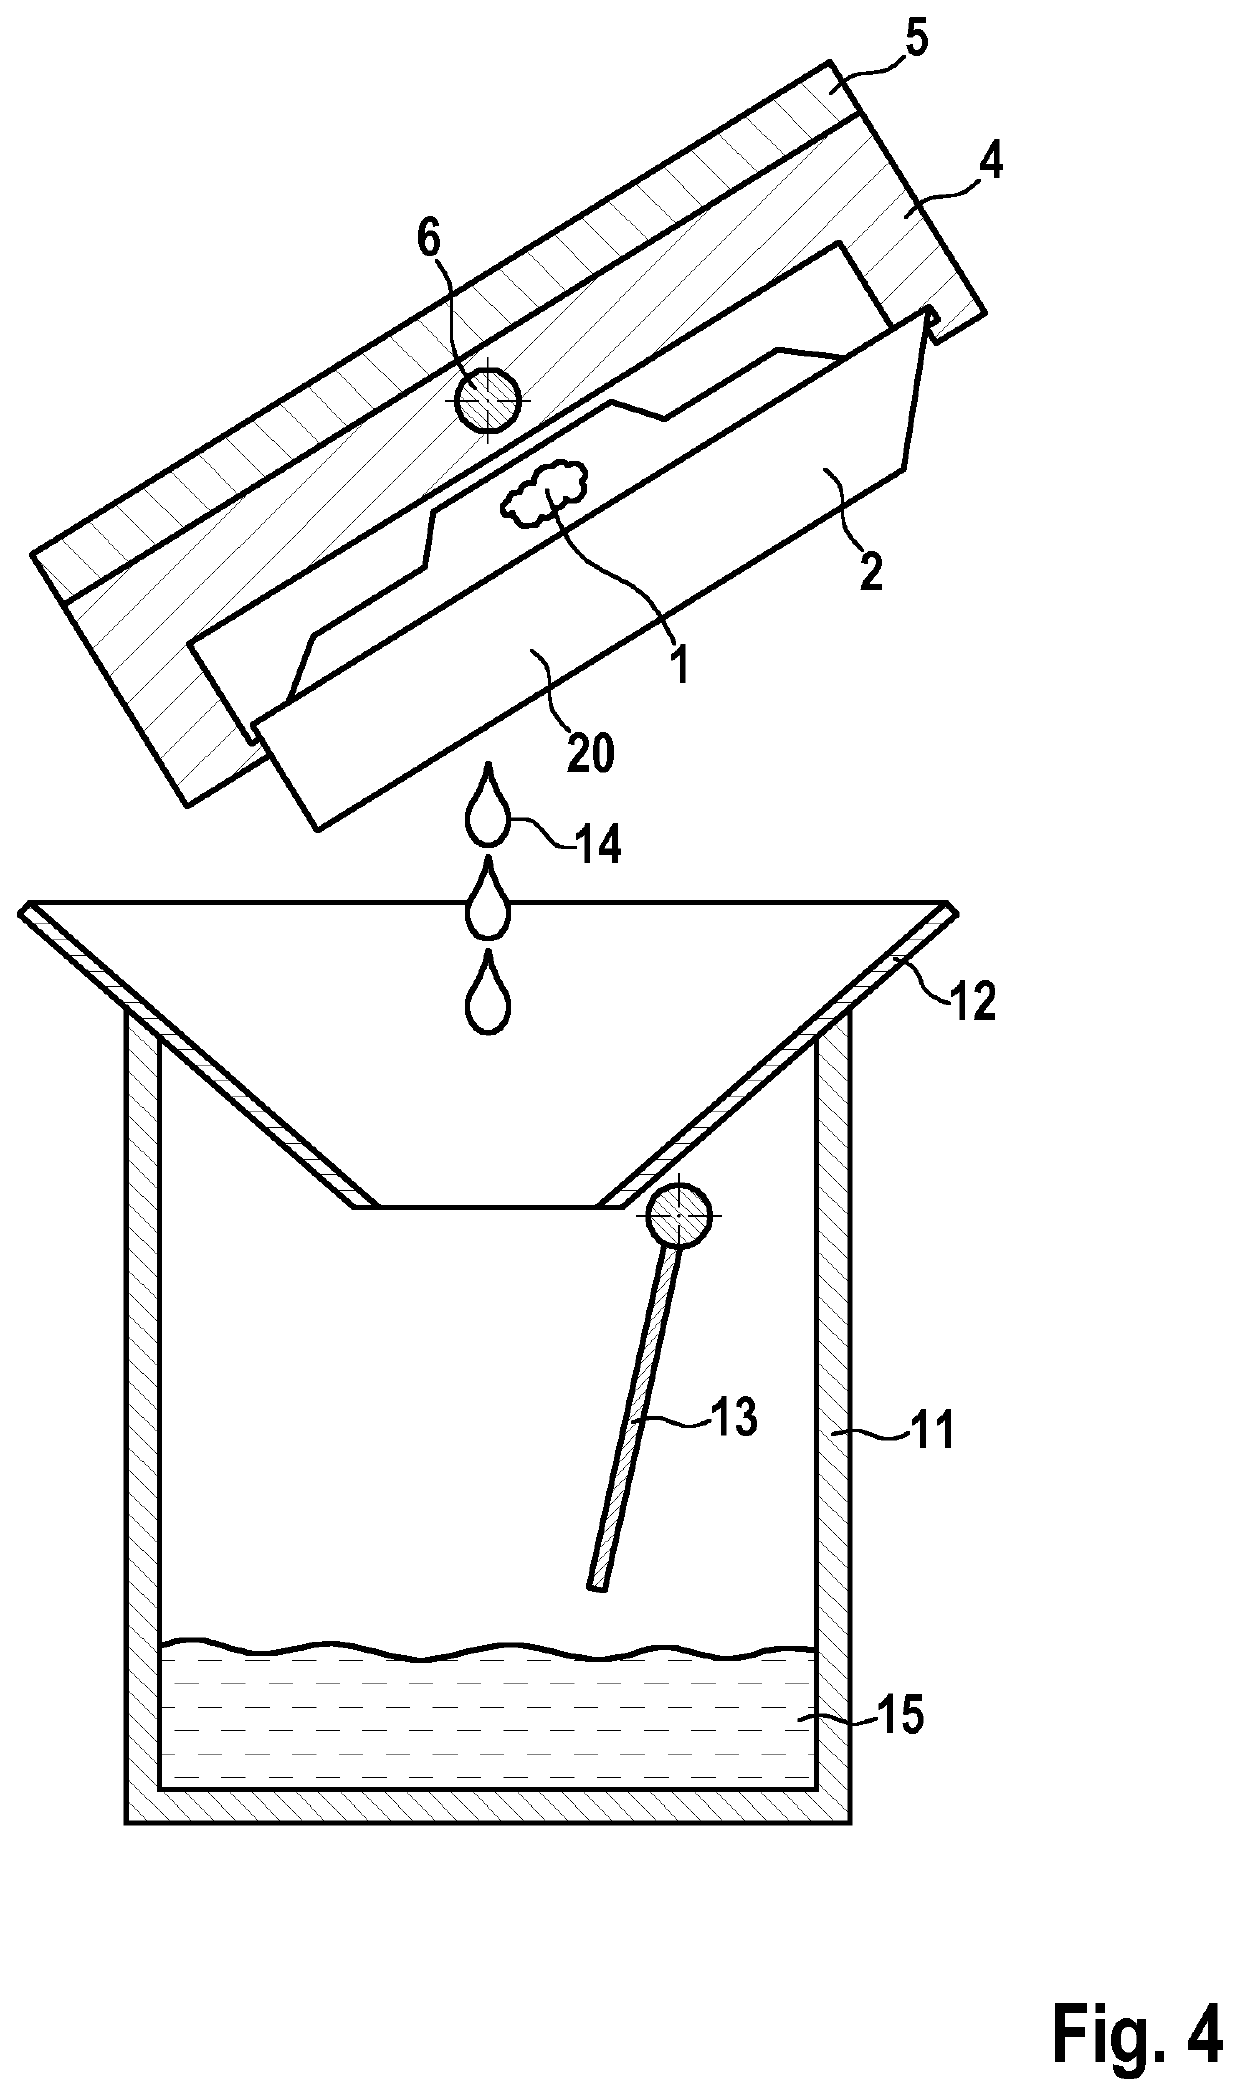 Device for preparing a tissue sample and particularly for producing a wax block containing a tissue sample